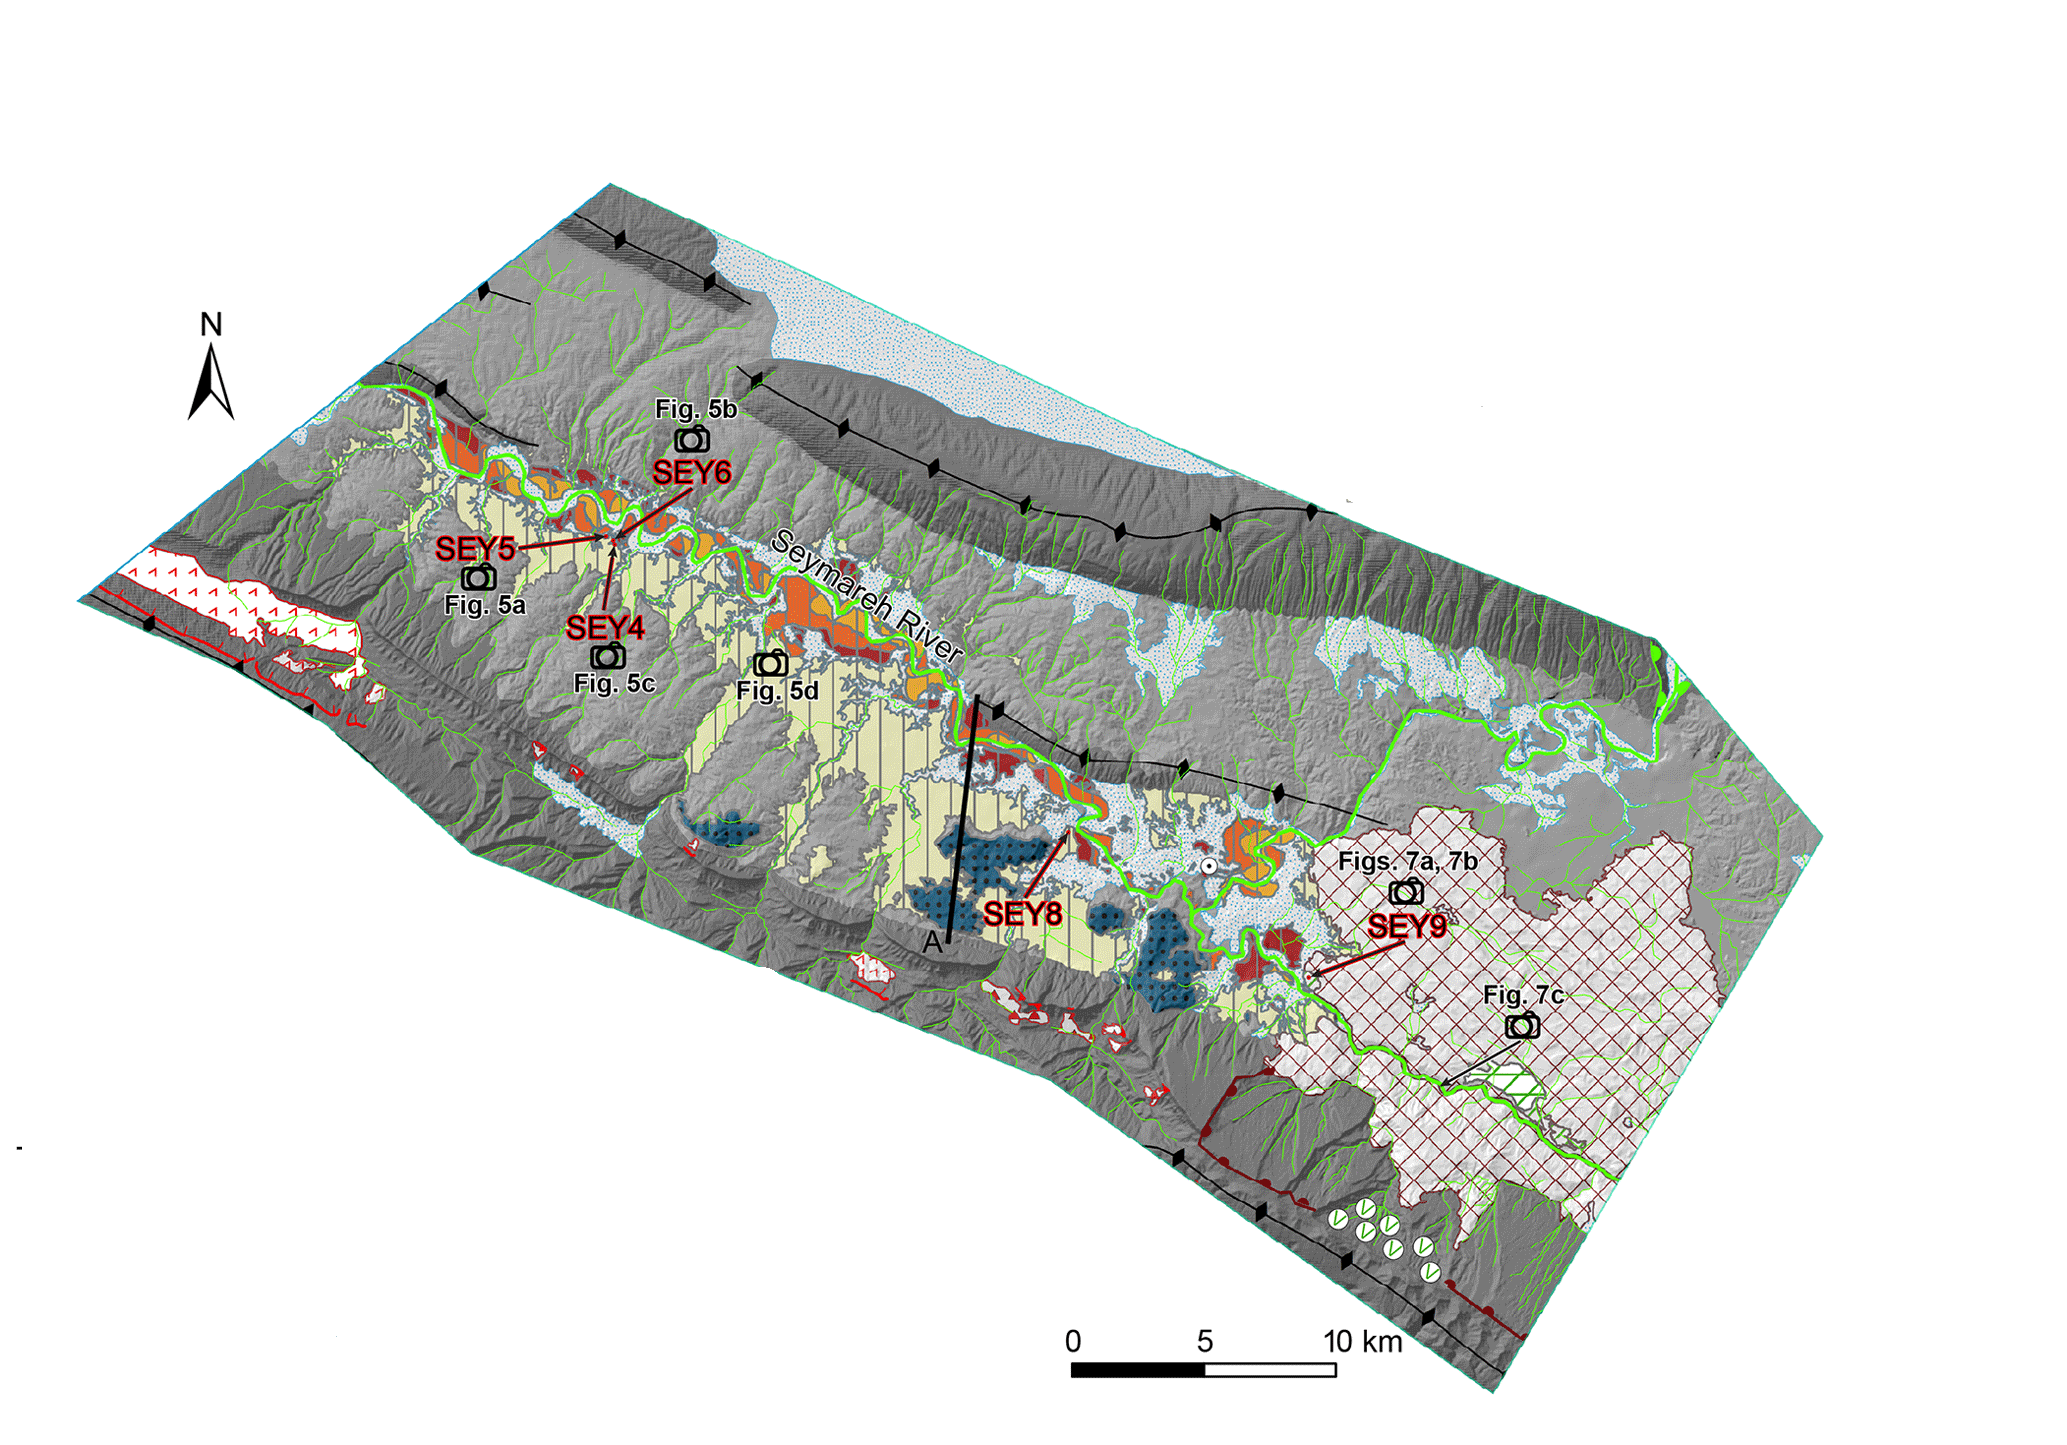 Geomorphological map of a sector of Zagros Mts., Iran (modified after Delchiaro et al., 2019, https://doi.org/10.5194/esurf-7-929-2019)